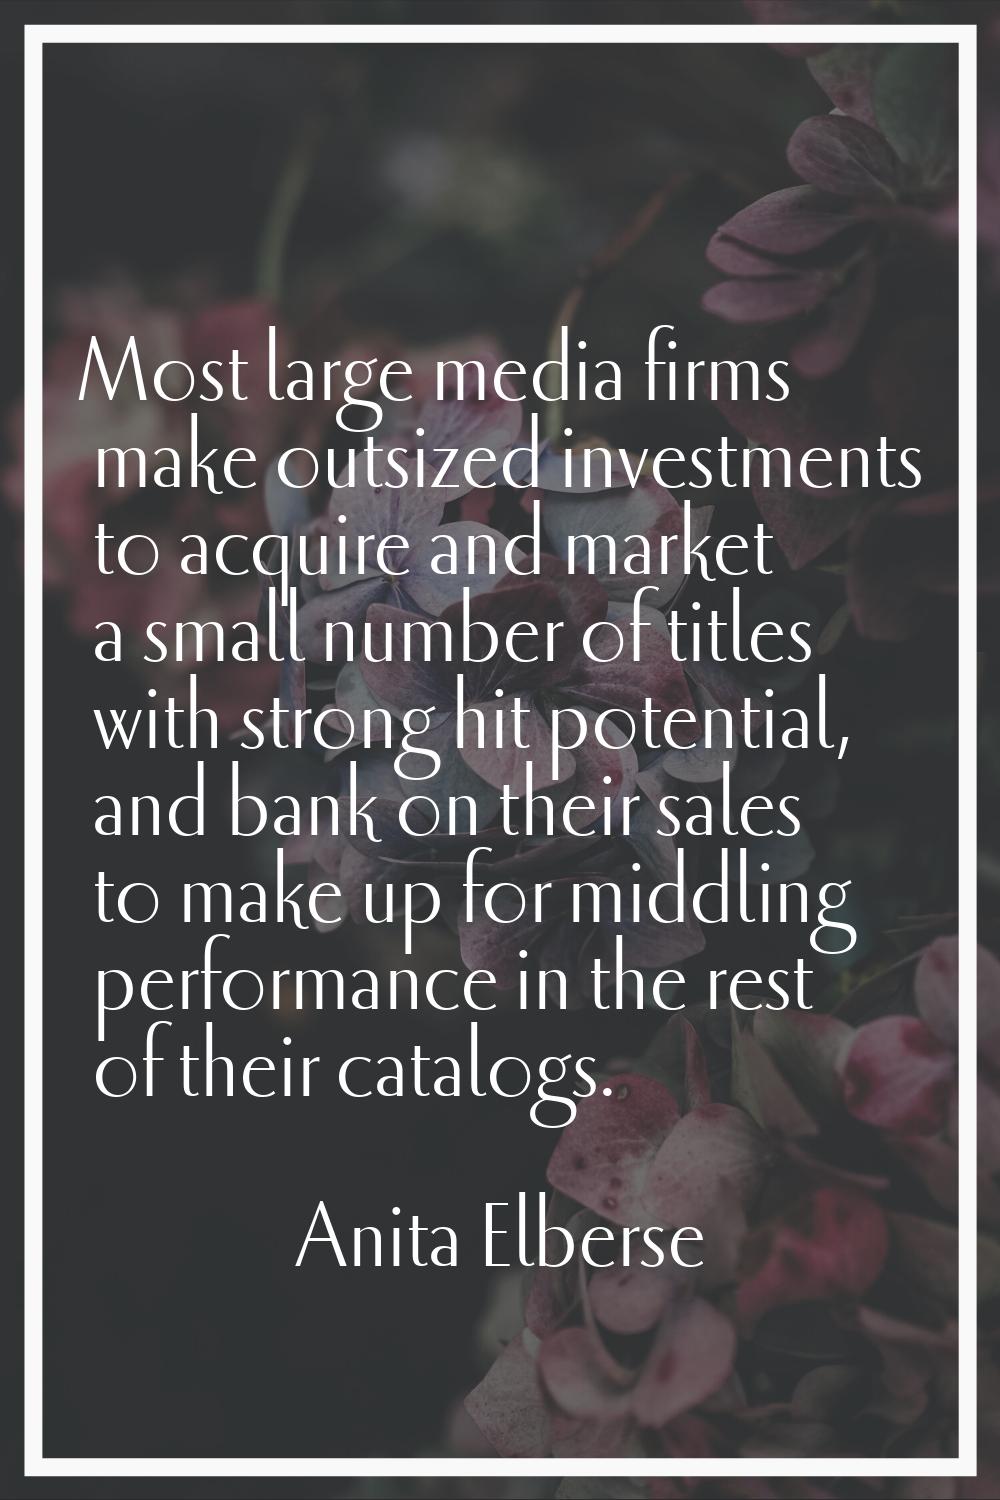 Most large media firms make outsized investments to acquire and market a small number of titles wit